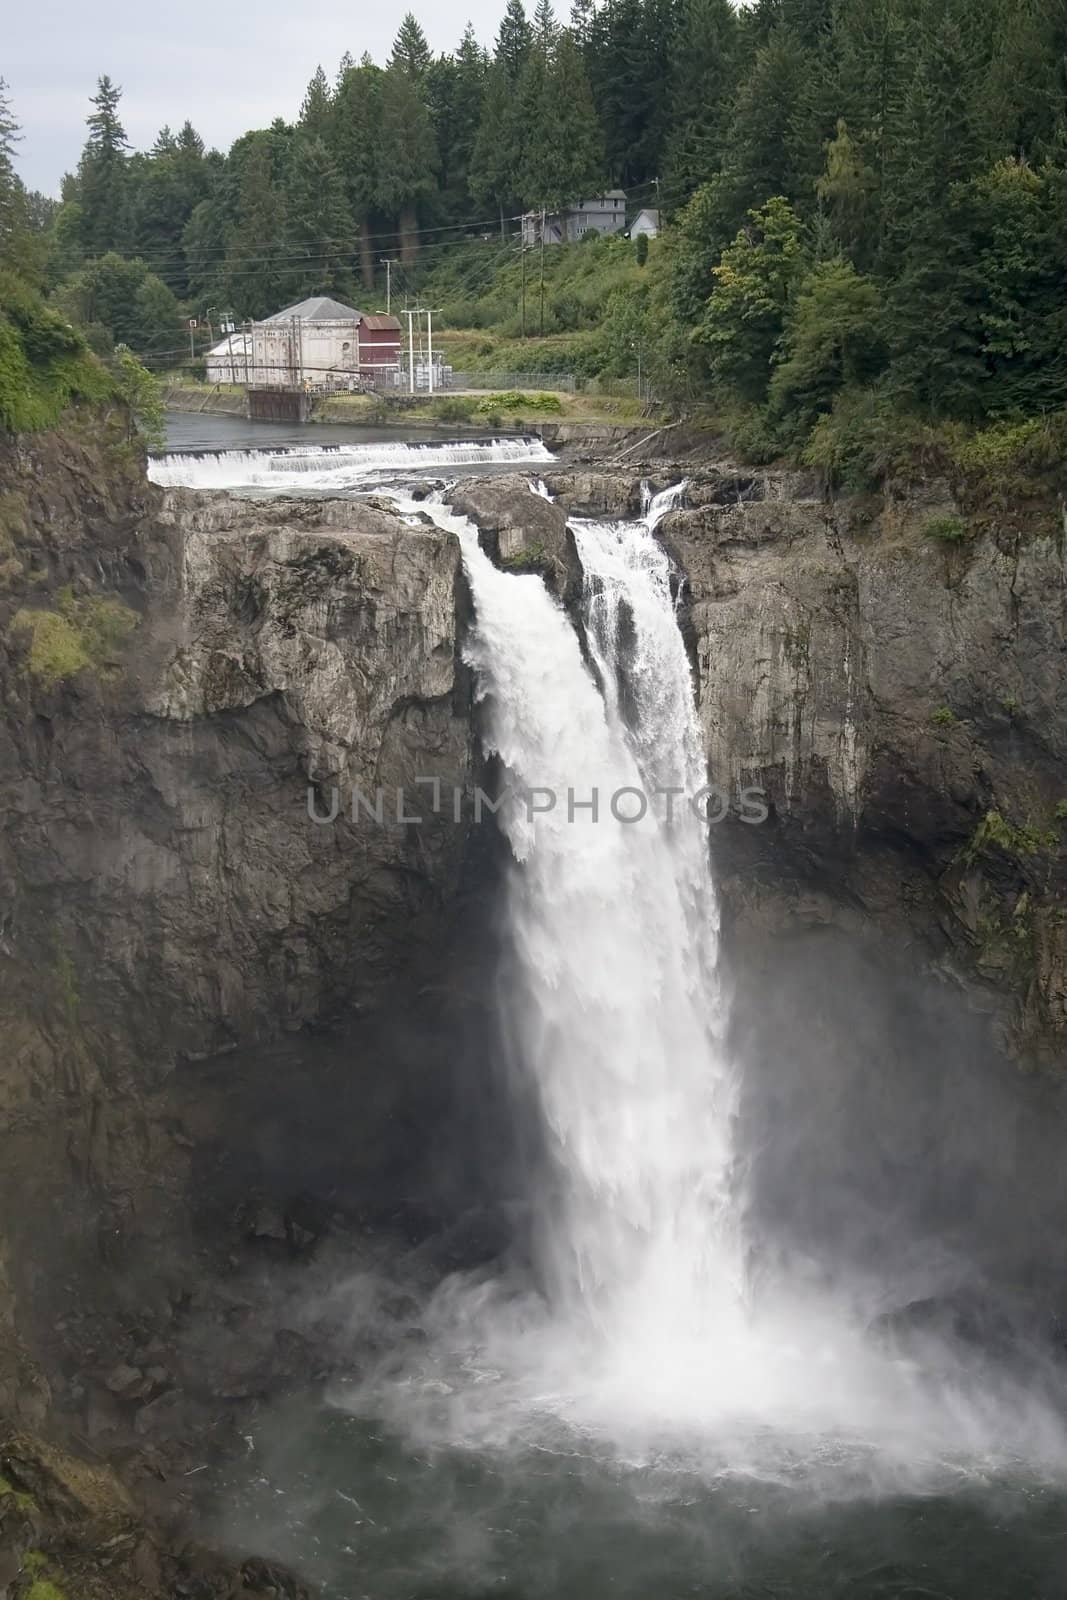 The hydroelectric plant on Snoqualmie Falls was built in 1909, one of the first of its kind and the most massive.